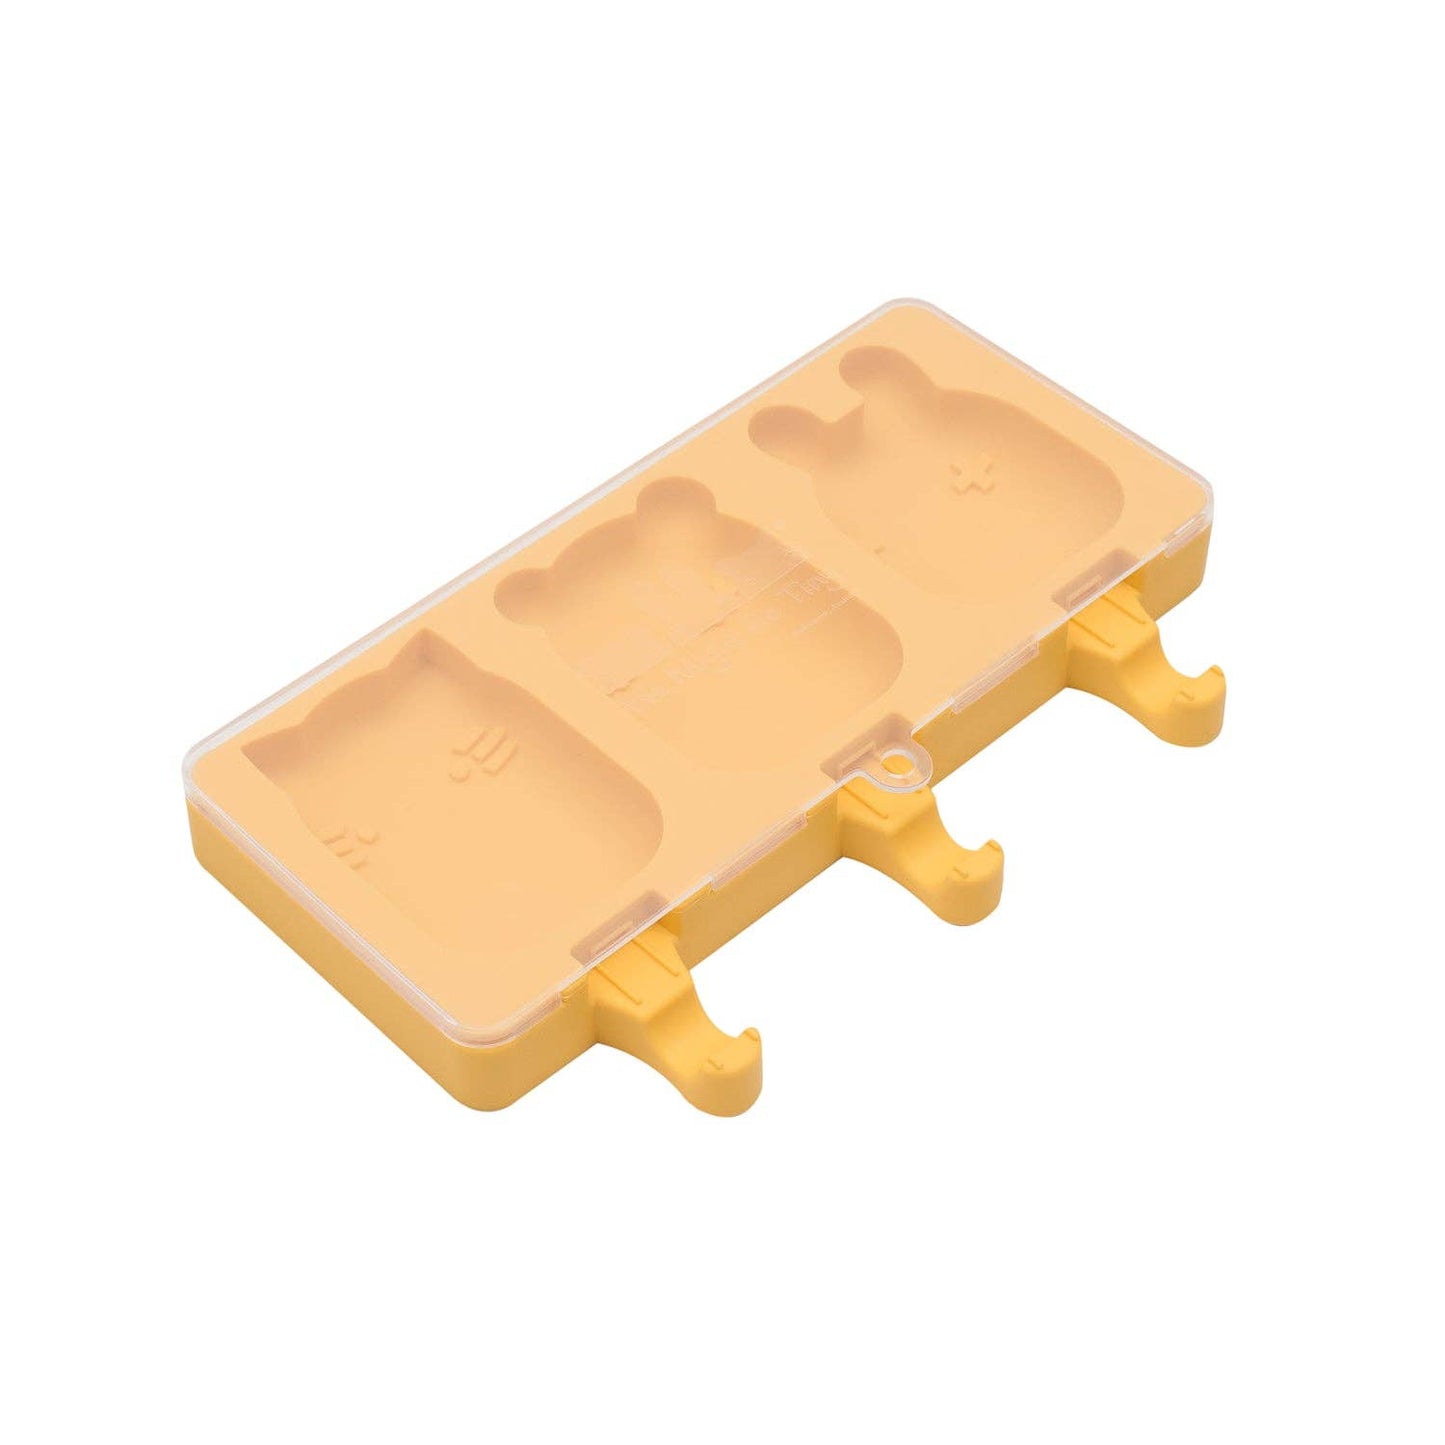 Icy pole Mould - Yellow